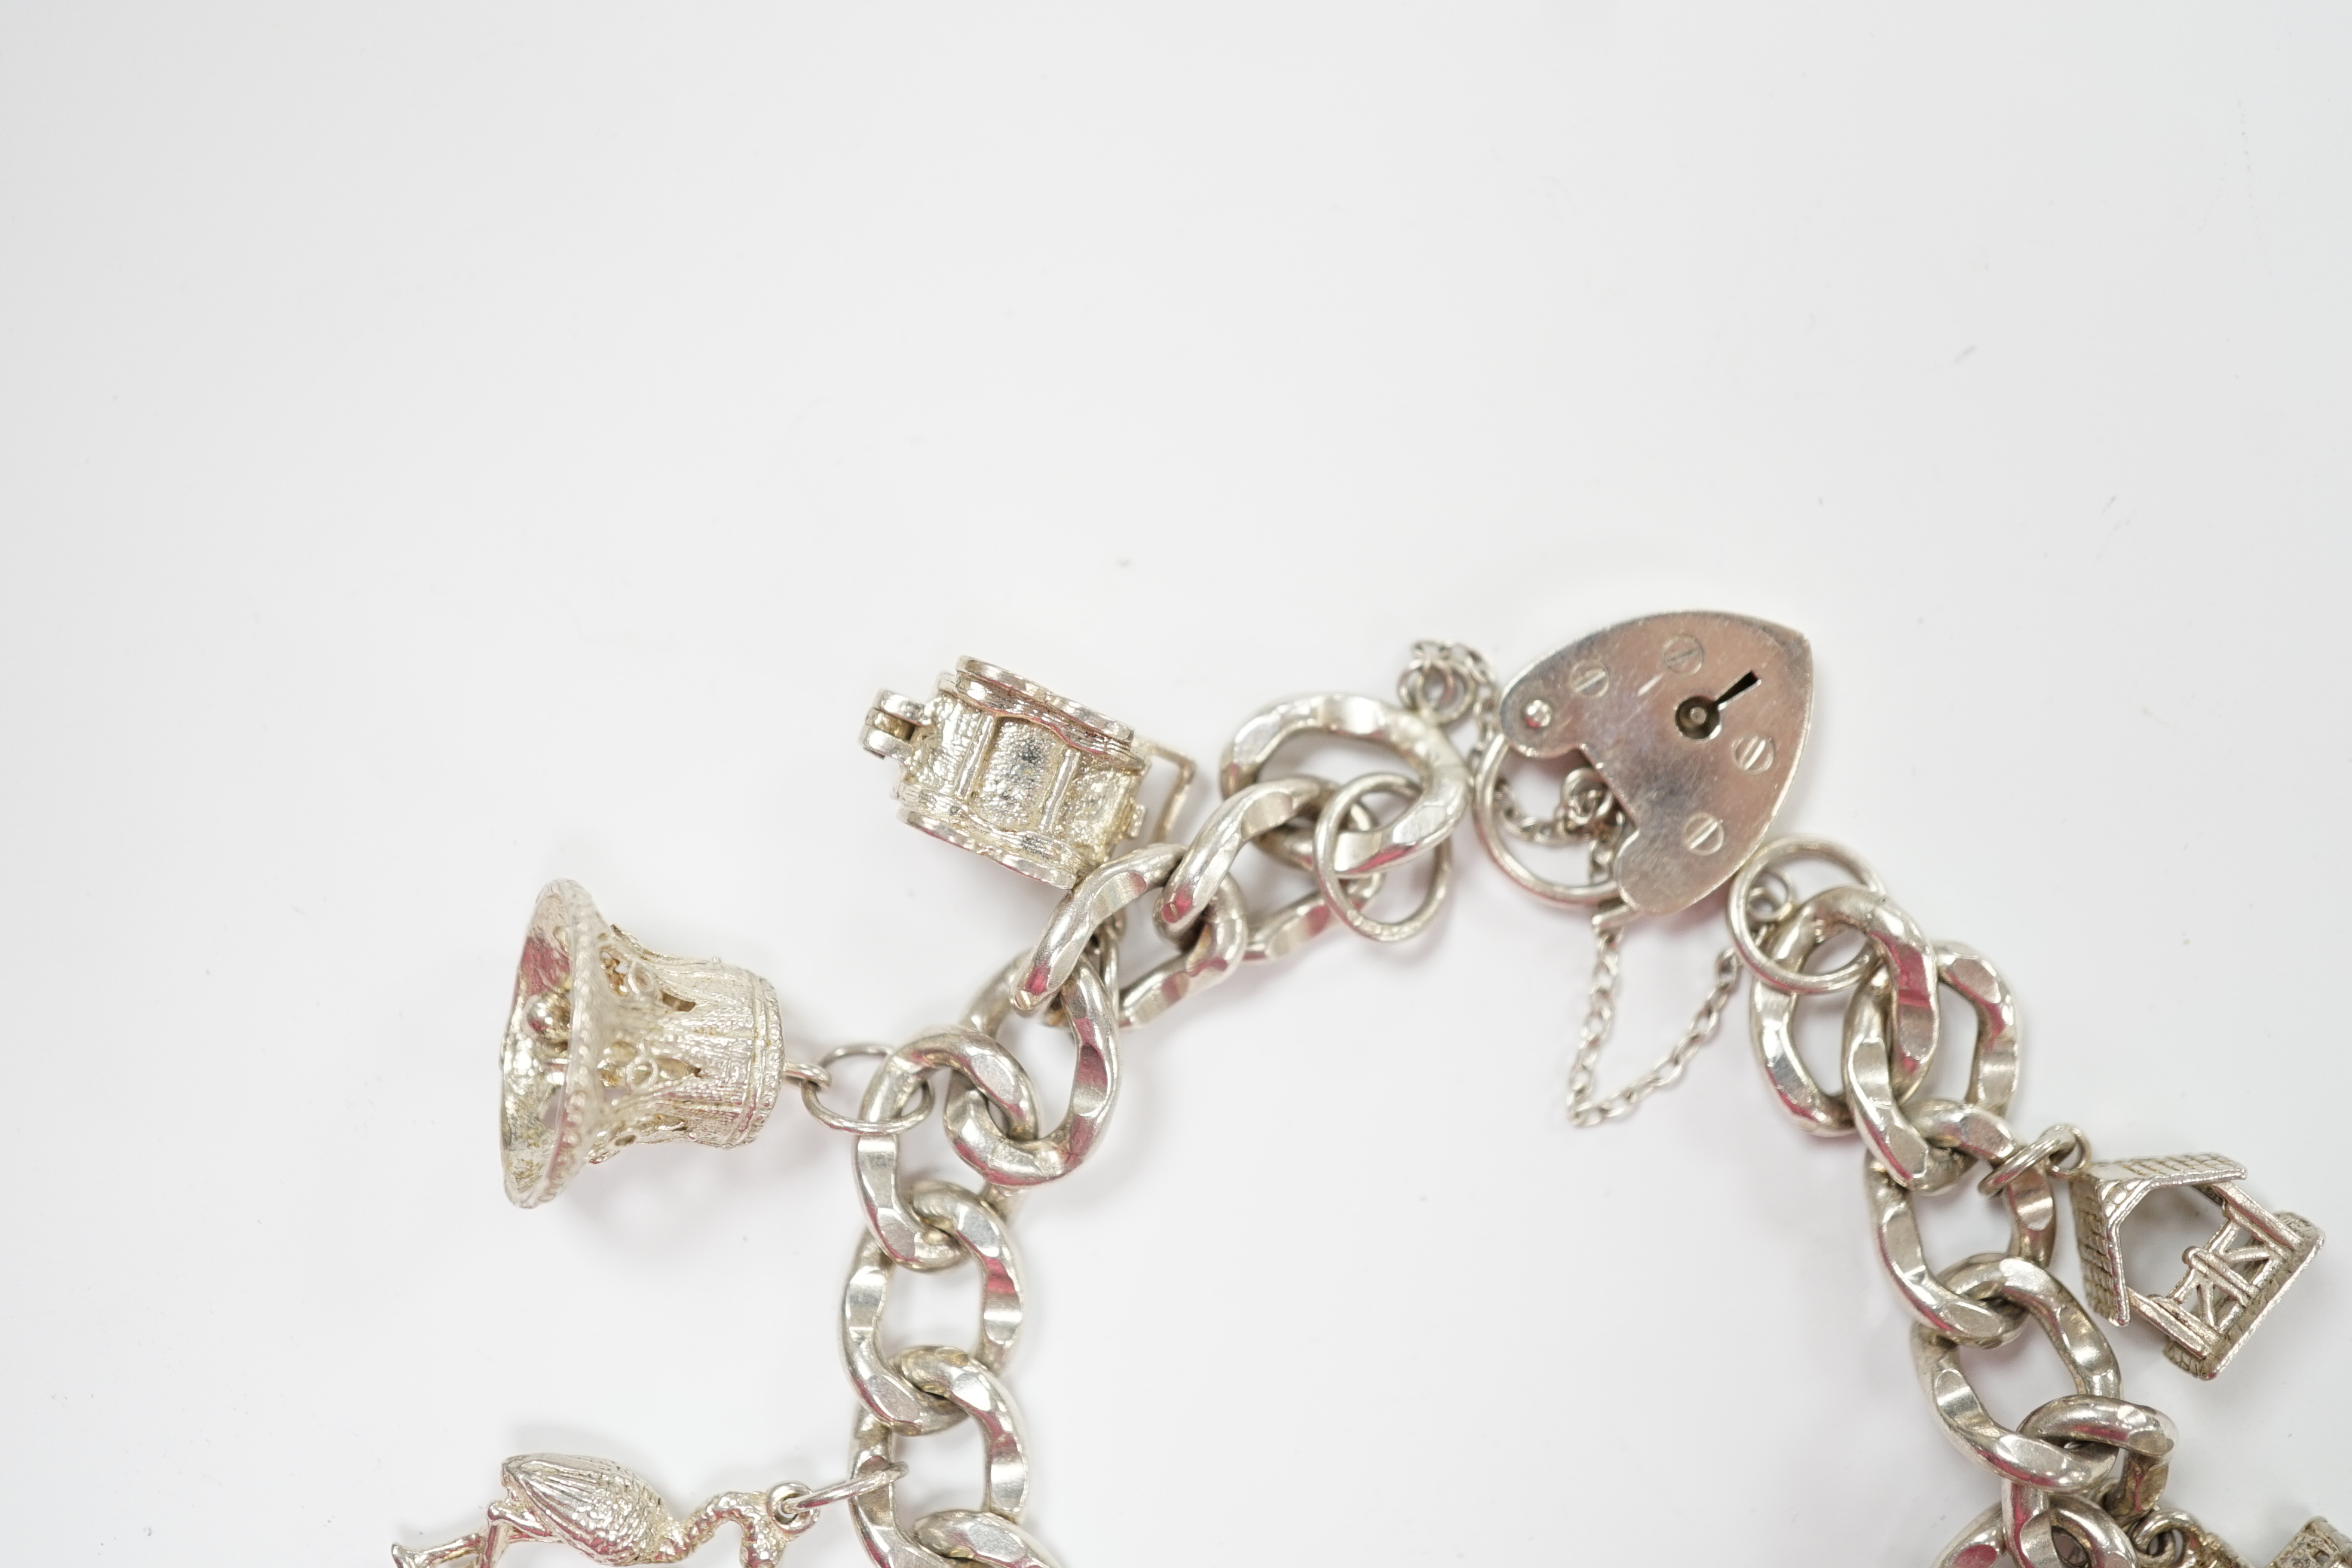 A modern silver charm bracelet, hung with nine assorted charms.